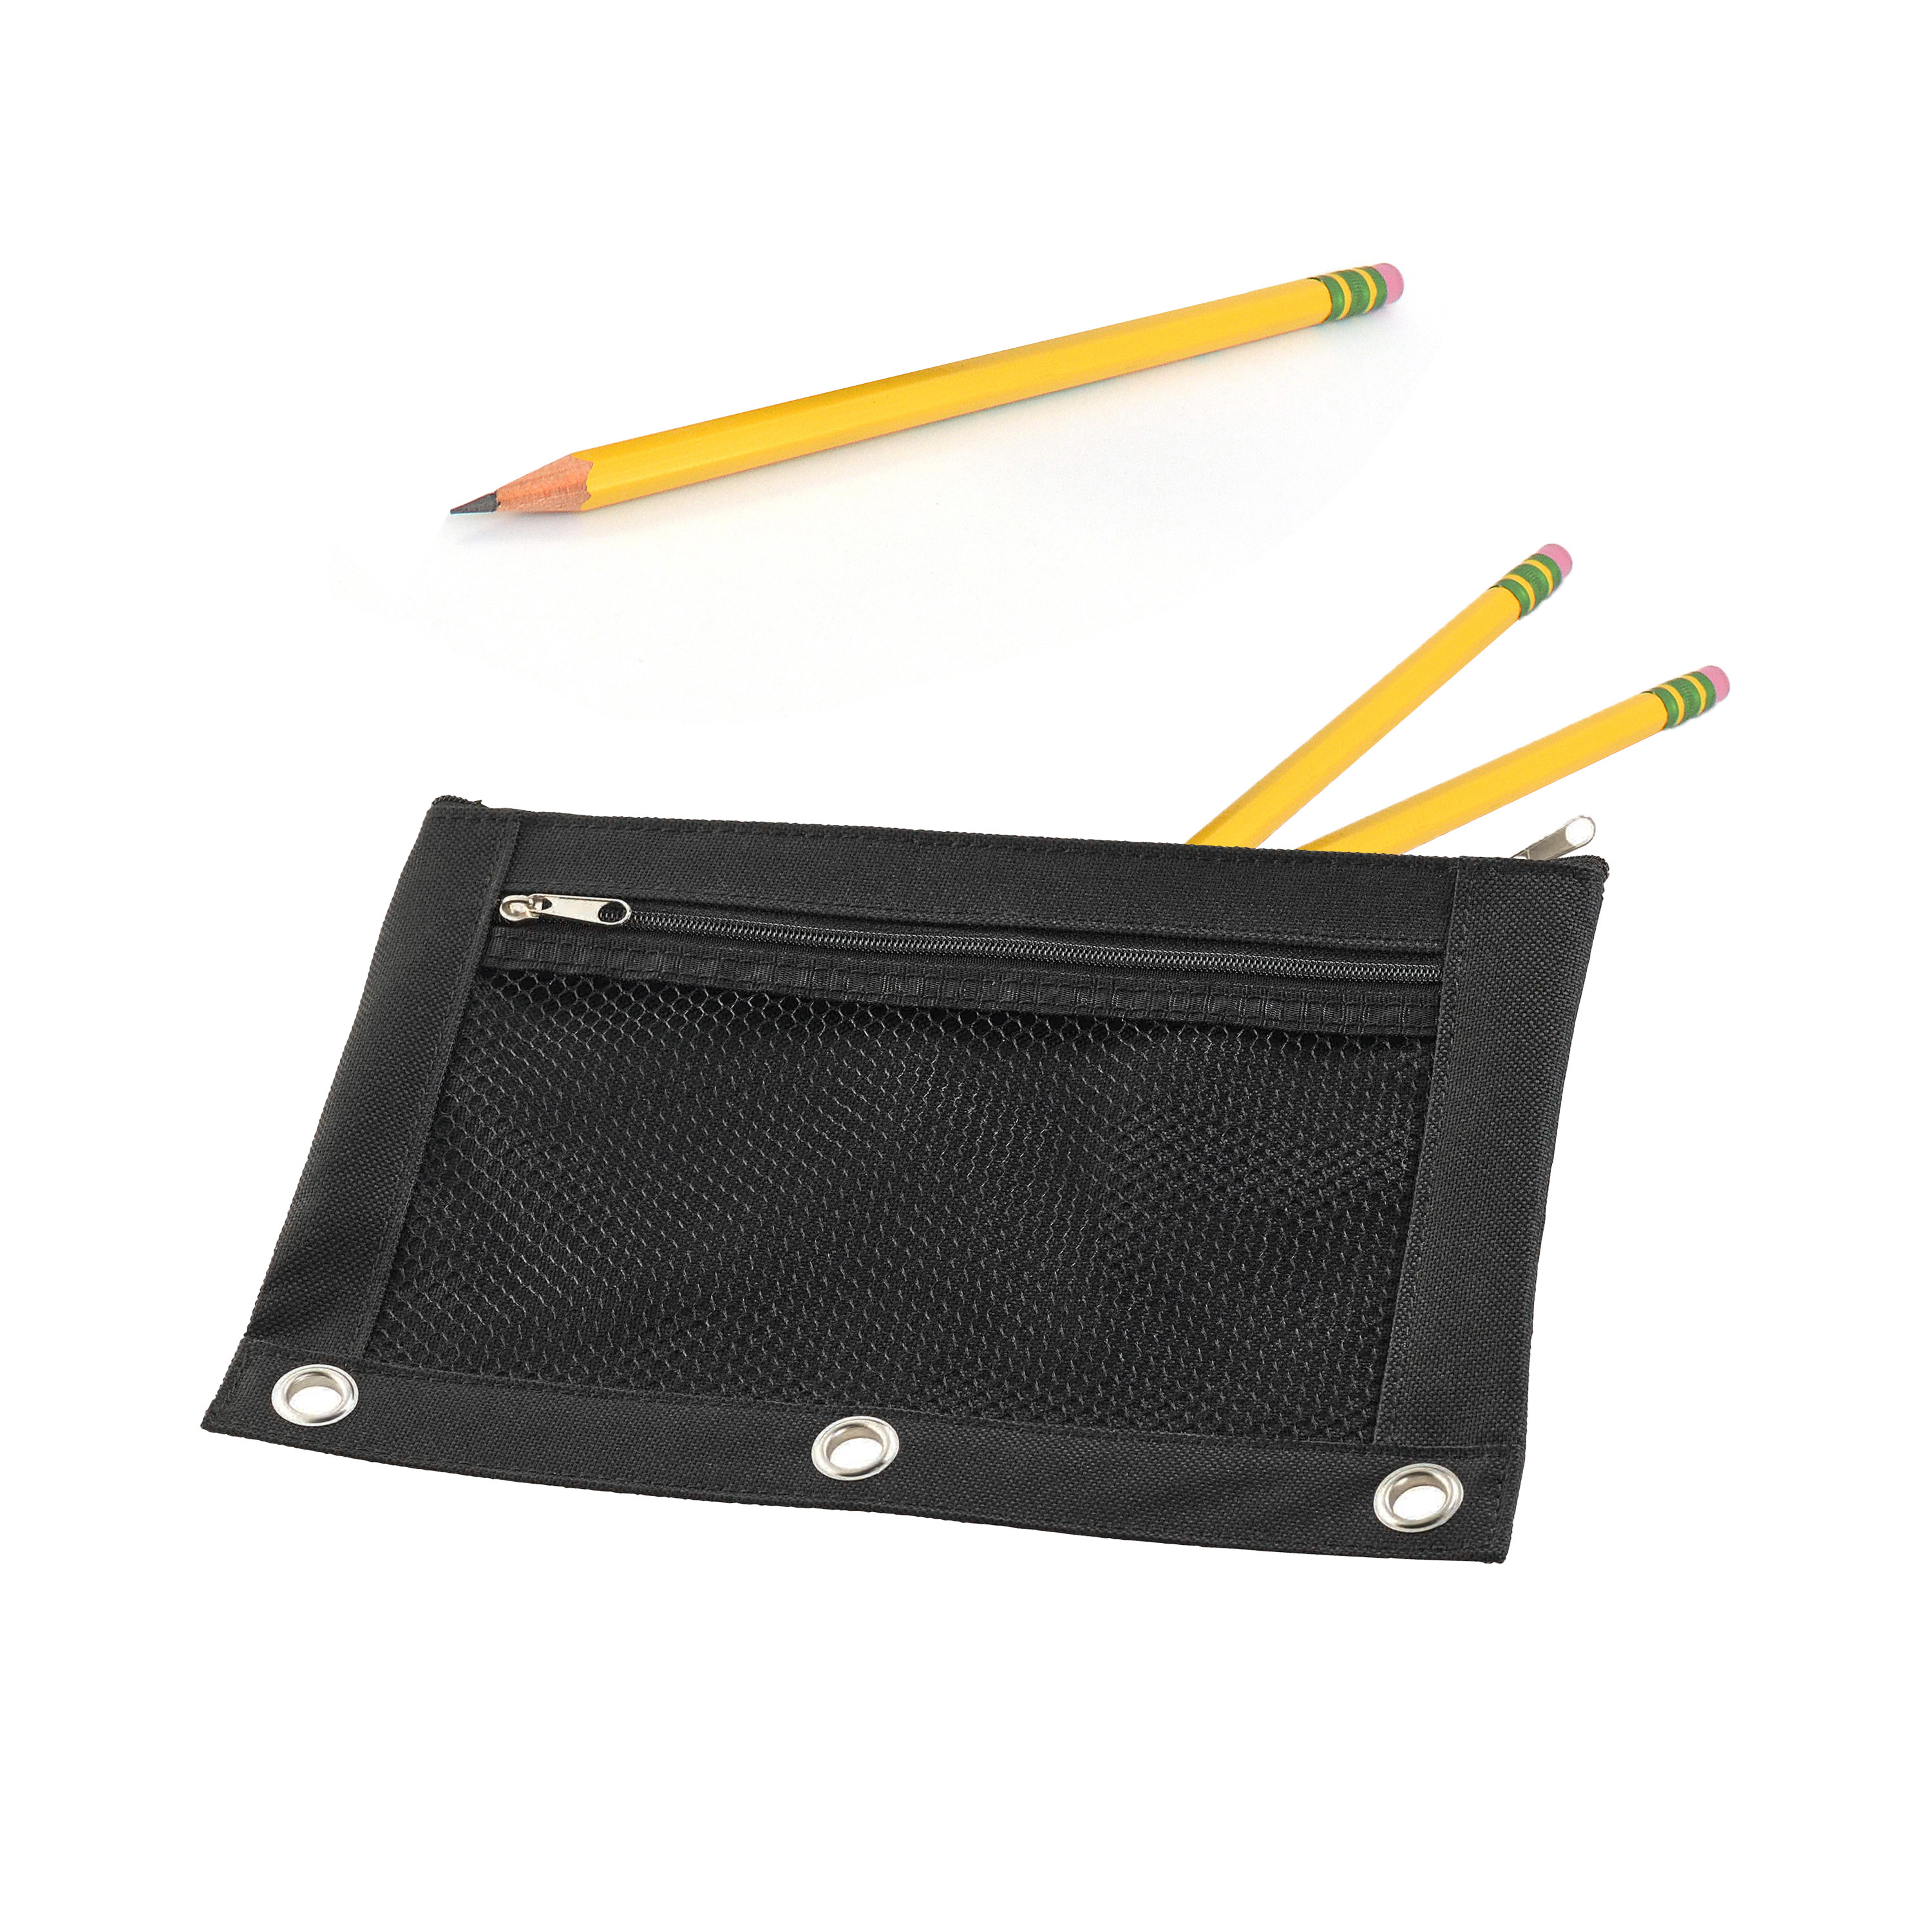  1InTheOffice Black Pencil Pouch, 3 Ring Binder Pencil Bag,  Pencil Case with Double Pocket and Mesh Window, 4 Pack (Canvas Black) :  Arts, Crafts & Sewing